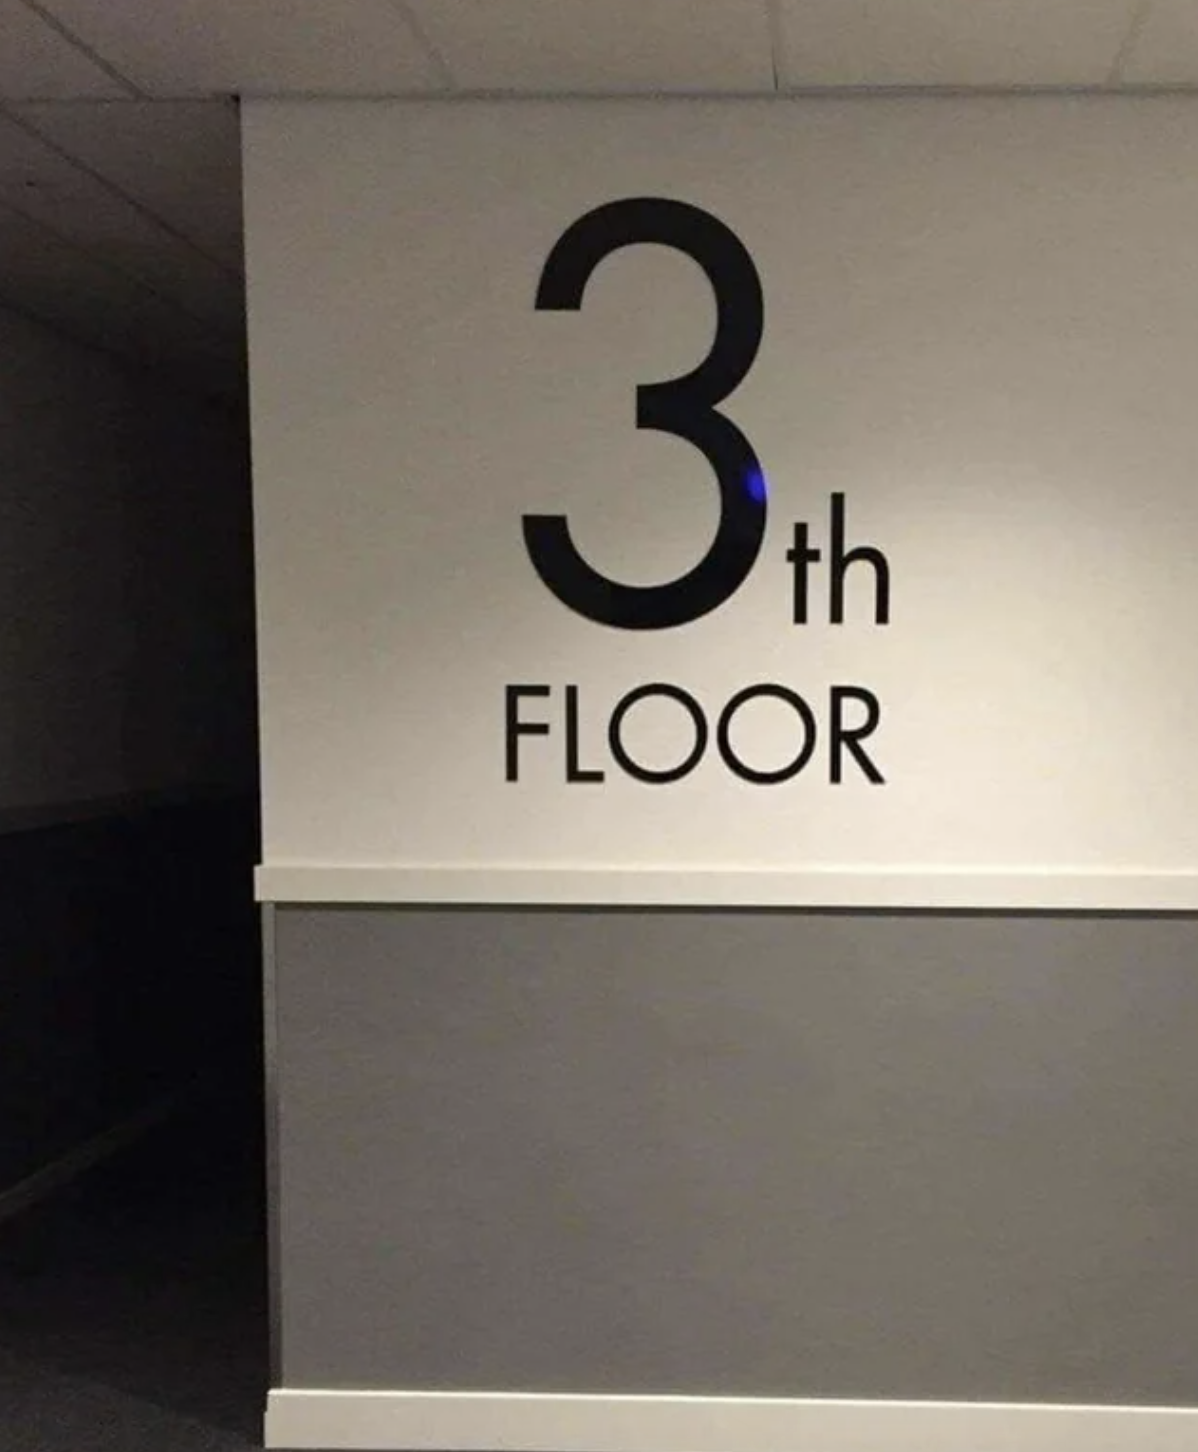 Large numbers and letters on the wall say this is the 3th floor instead of the 3rd floor